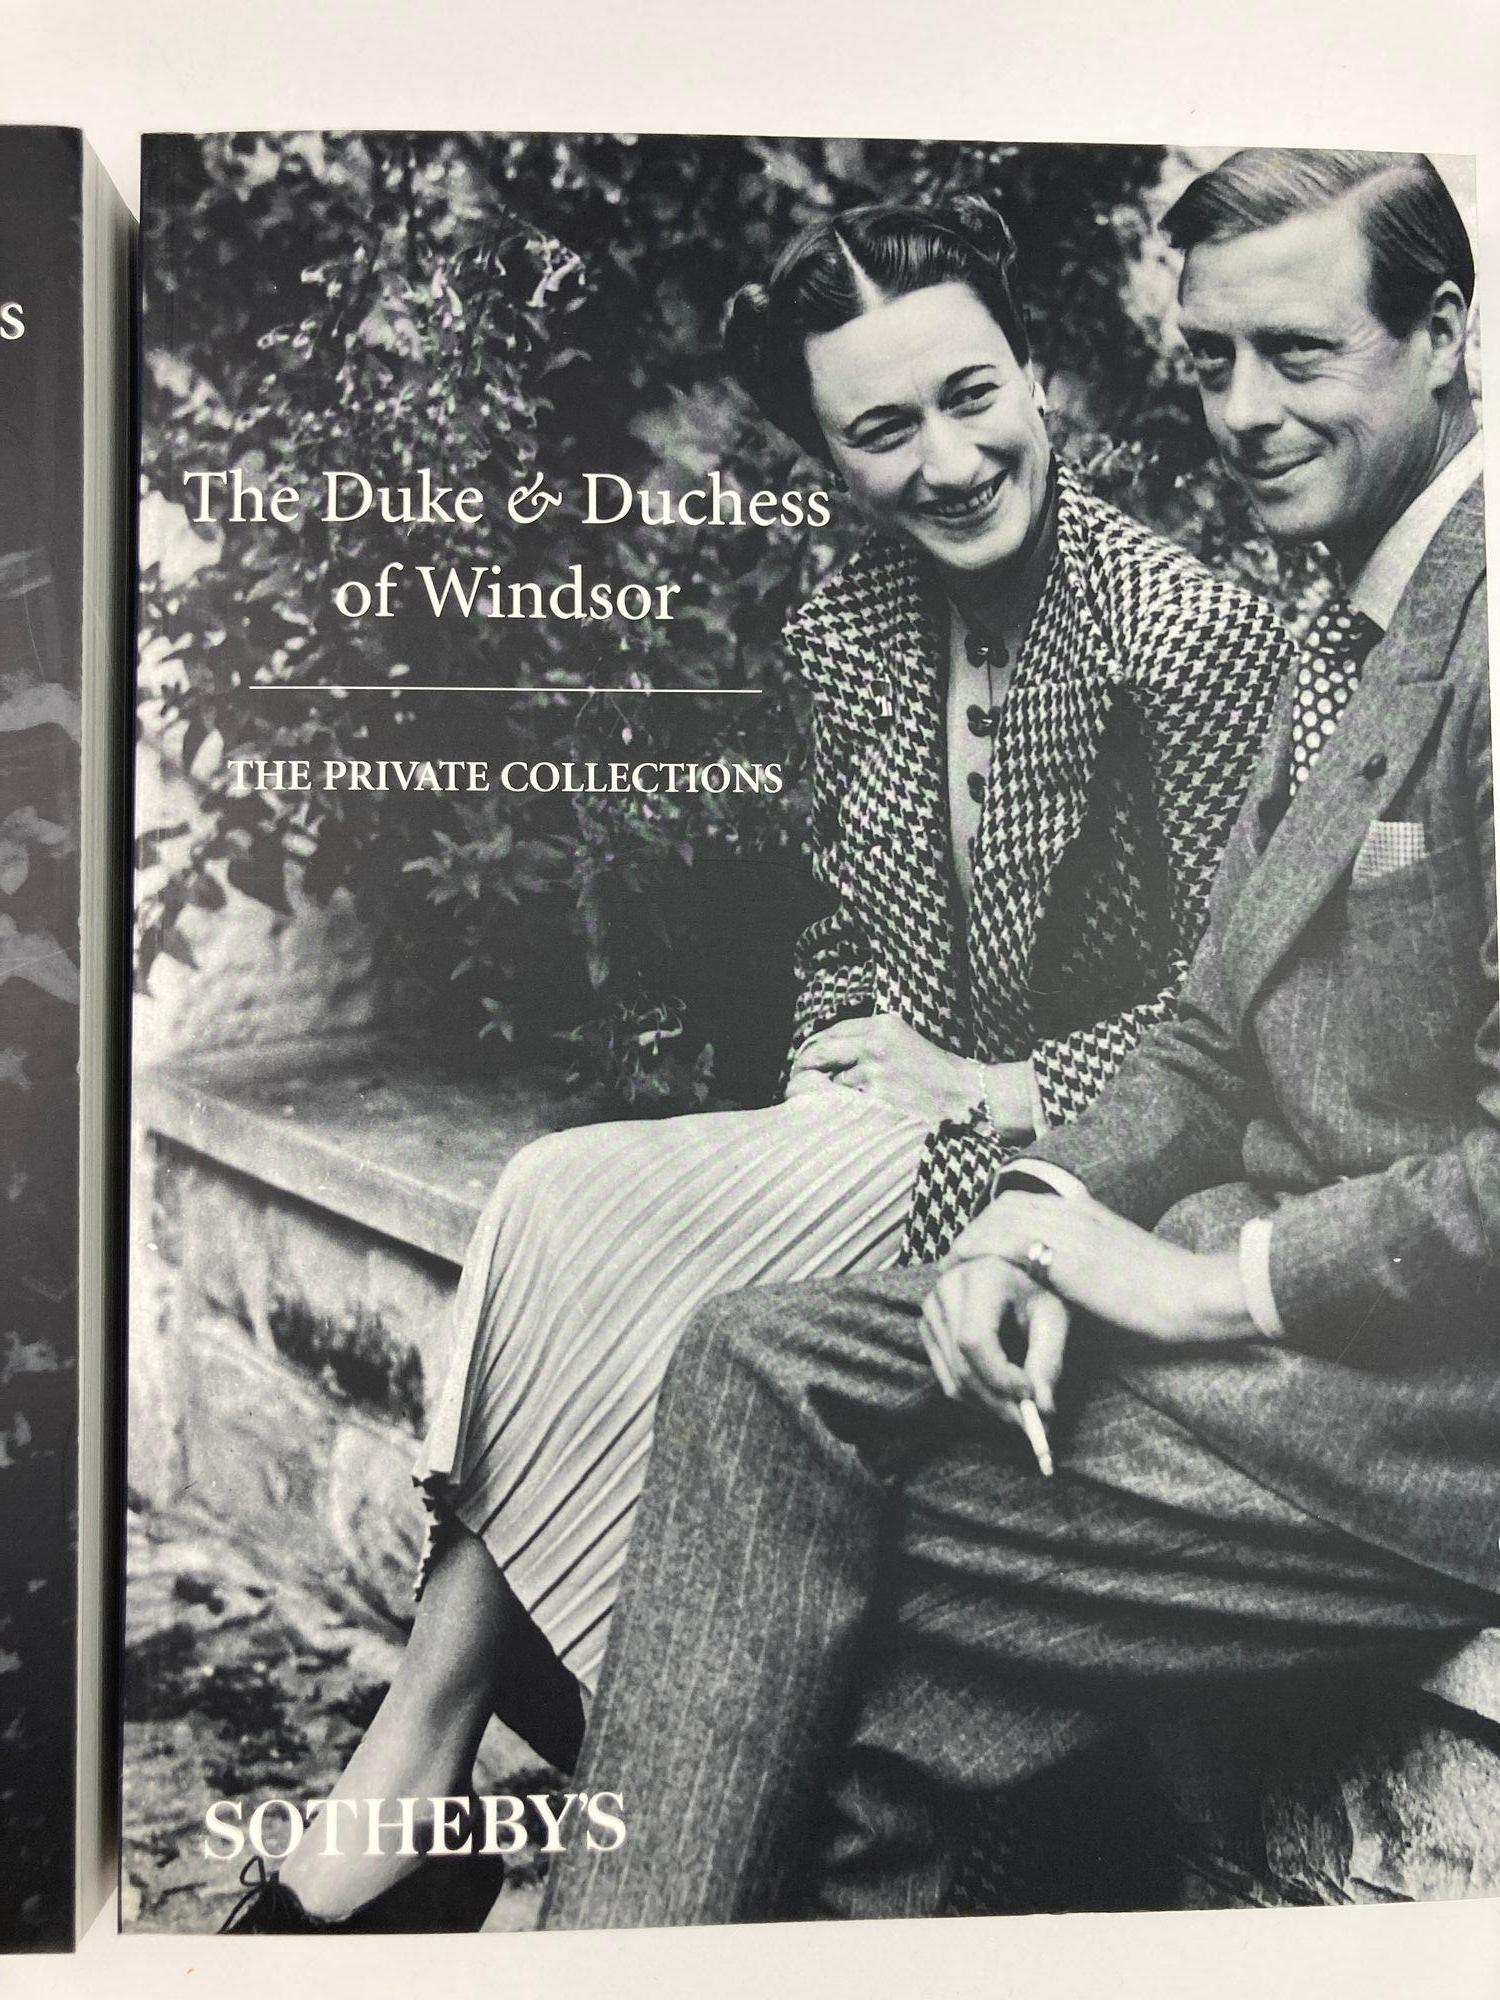 Paper The Duke and Duchess of Windsor Auction Sothebys Books Catalogs in Slipcase Box For Sale